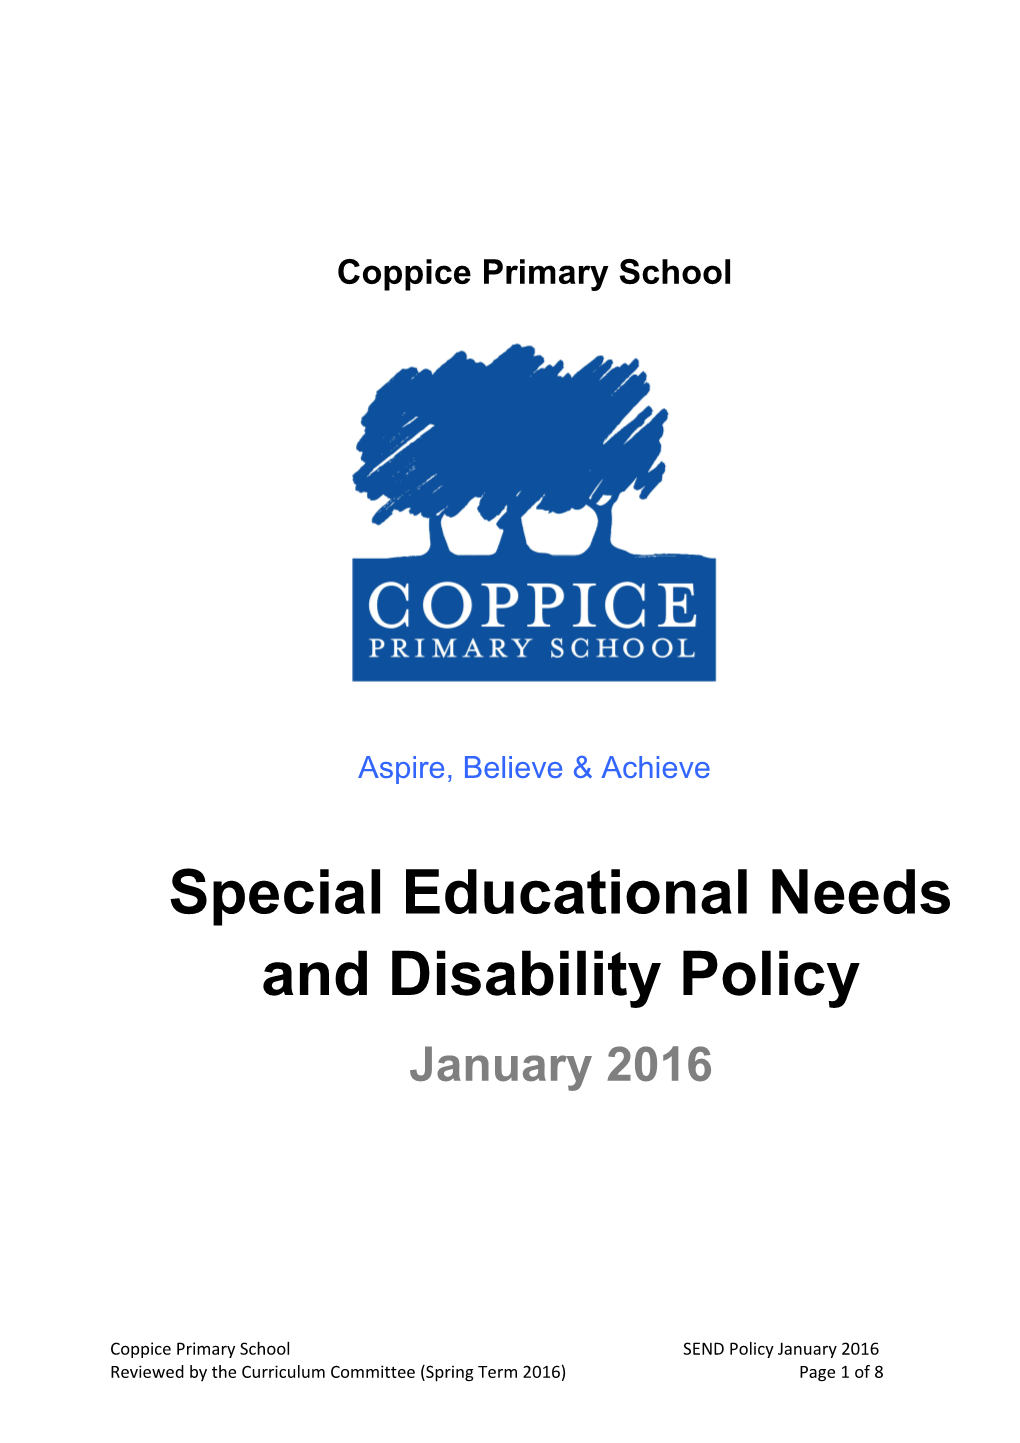 Special Educational Needs and Disability Policy